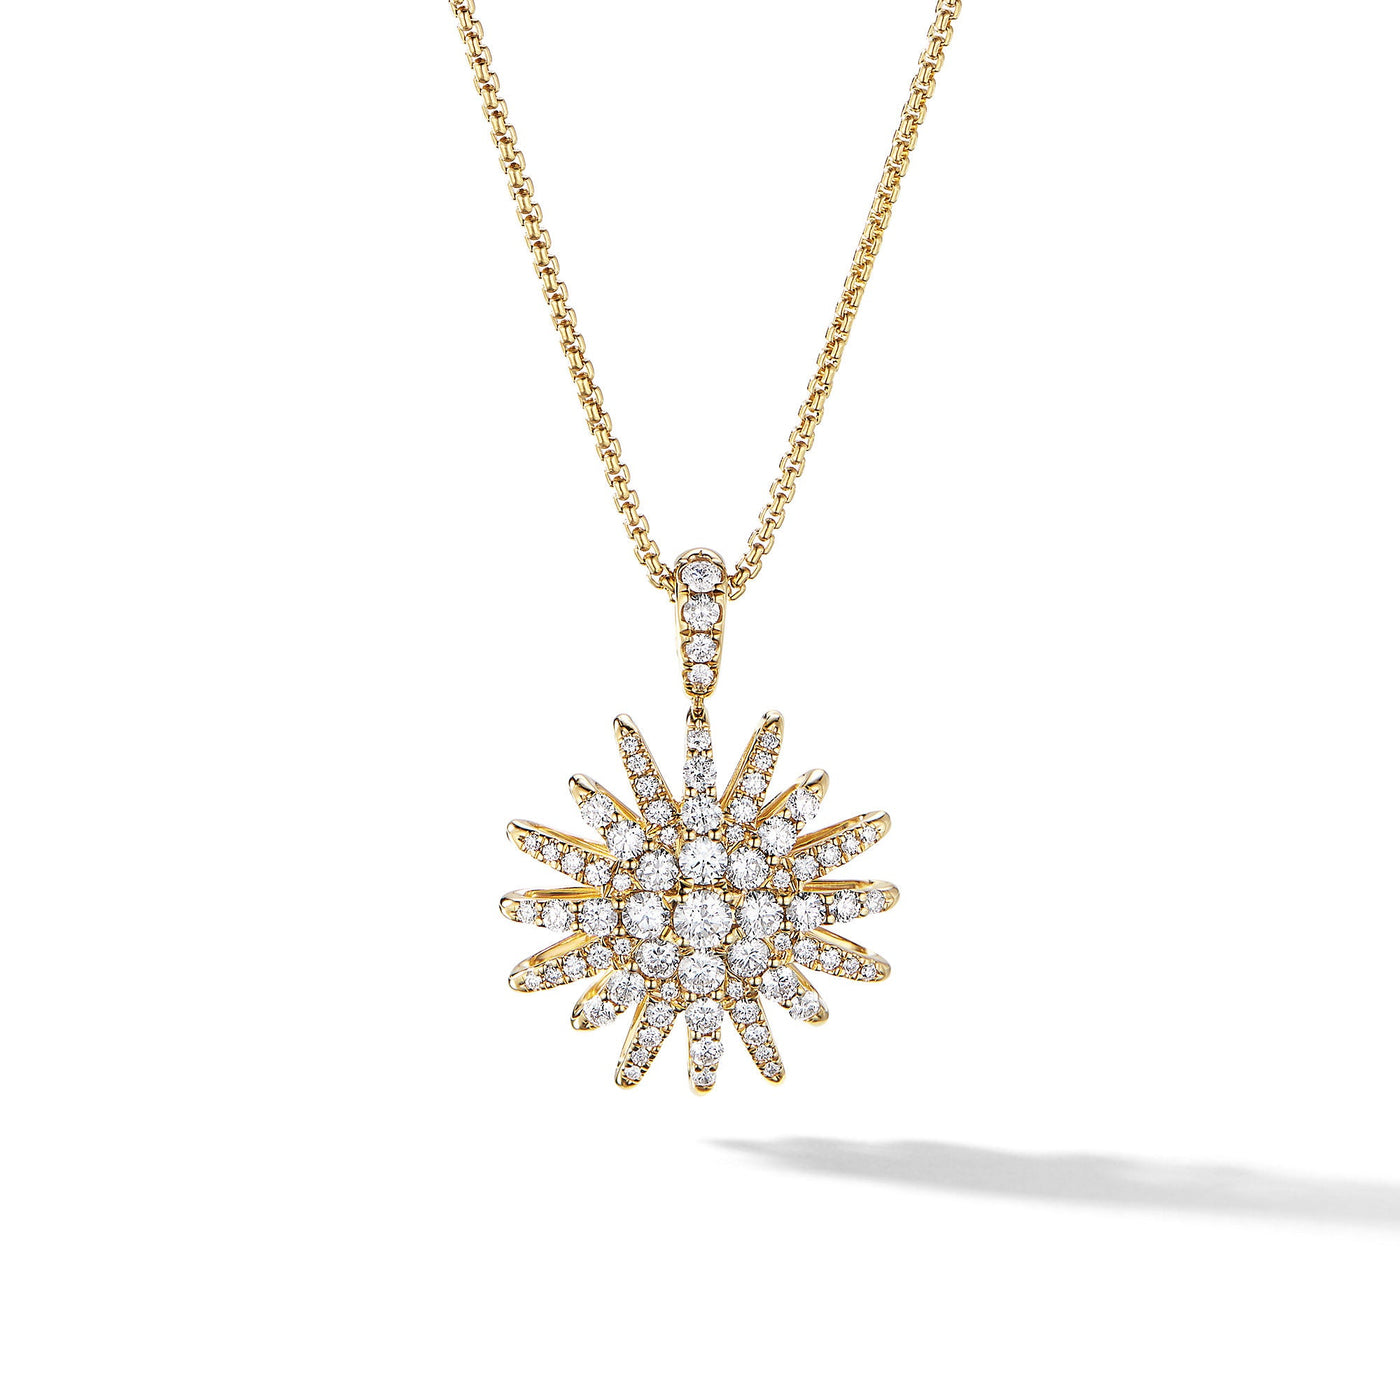 Starburst Pendant Necklace in 18K Yellow Gold with Diamonds\, 20mm